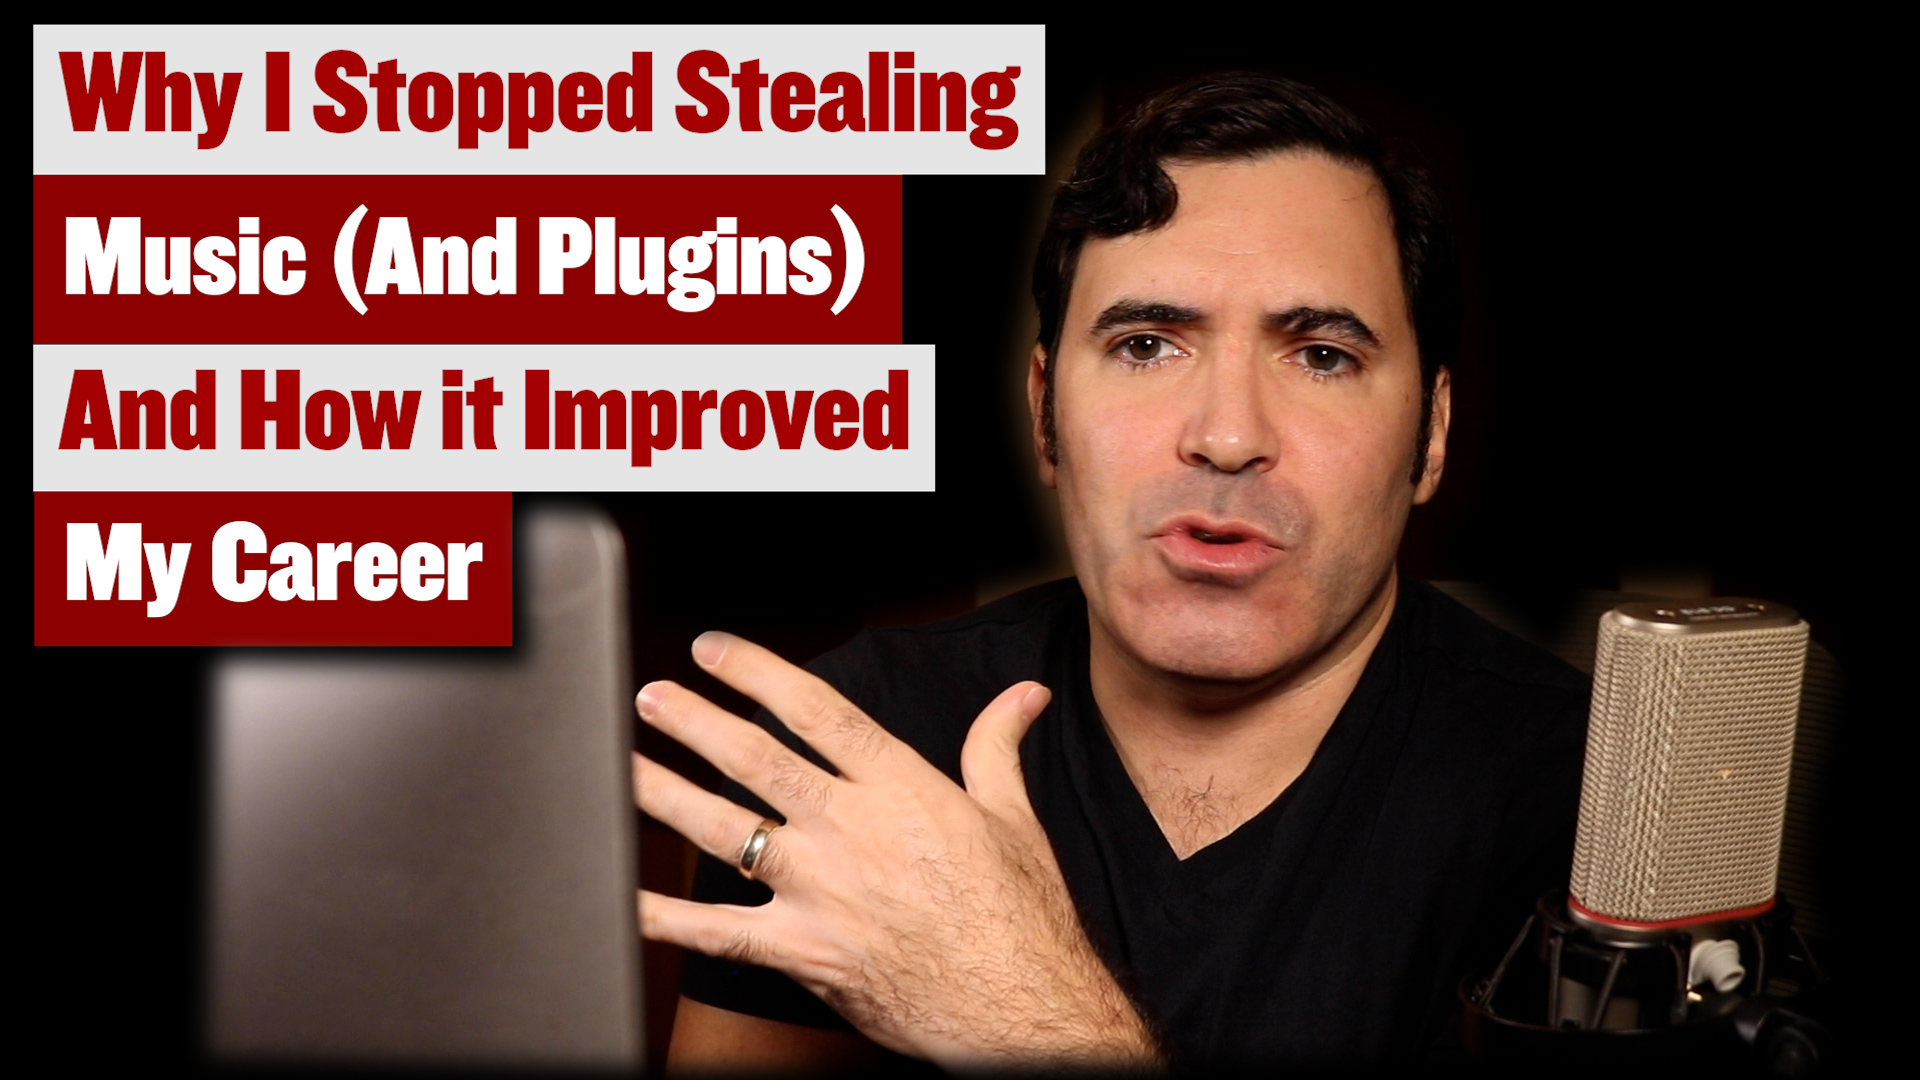 Why I Stopped Stealing Music (and Plugins) and How It Helped My Career